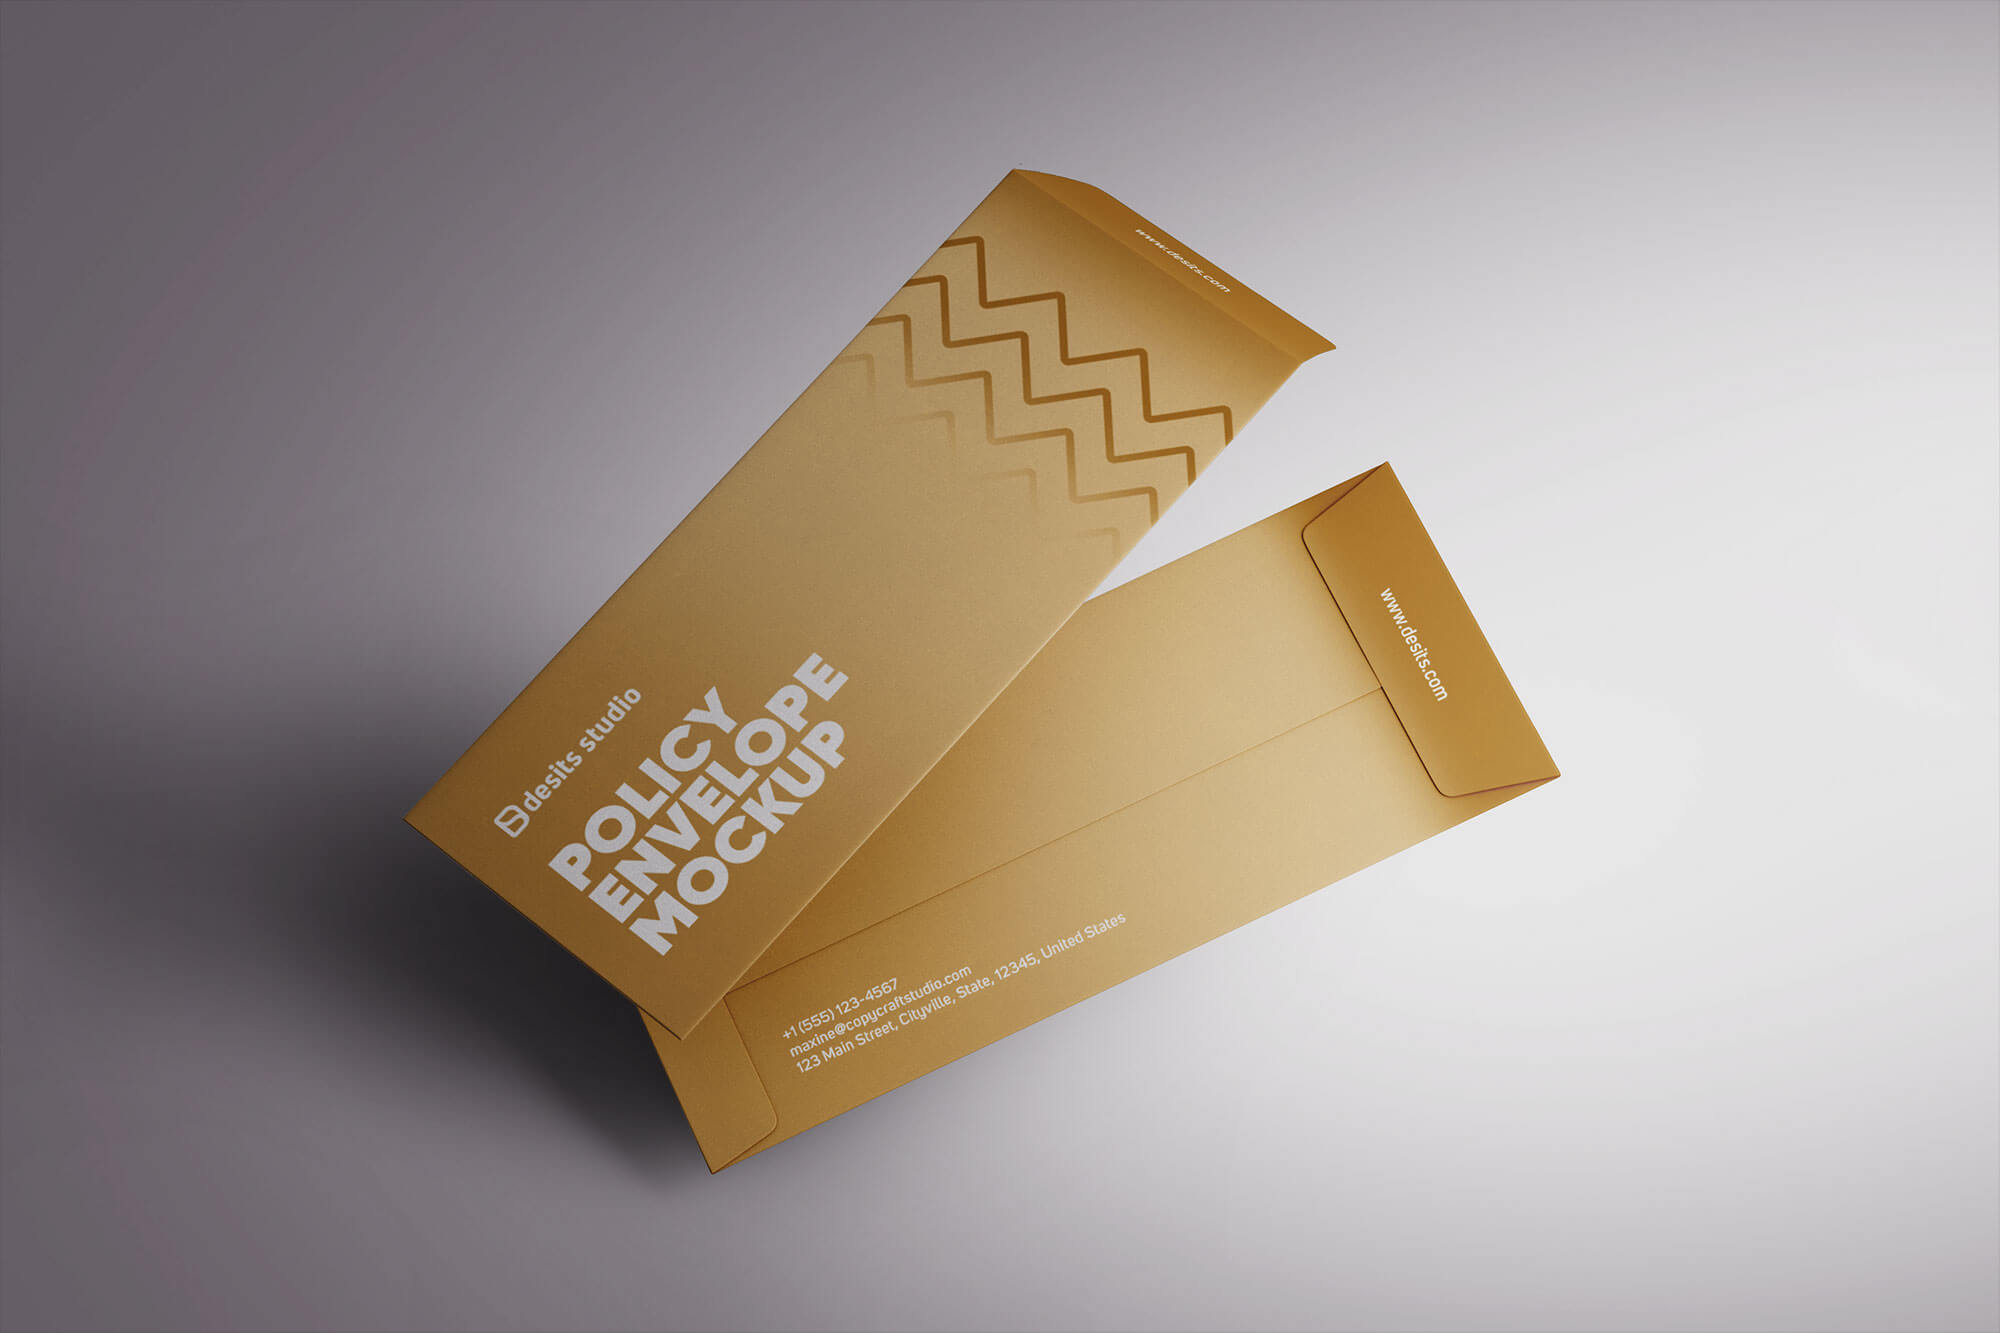 Free Policy Business Envelope Mockup PSD